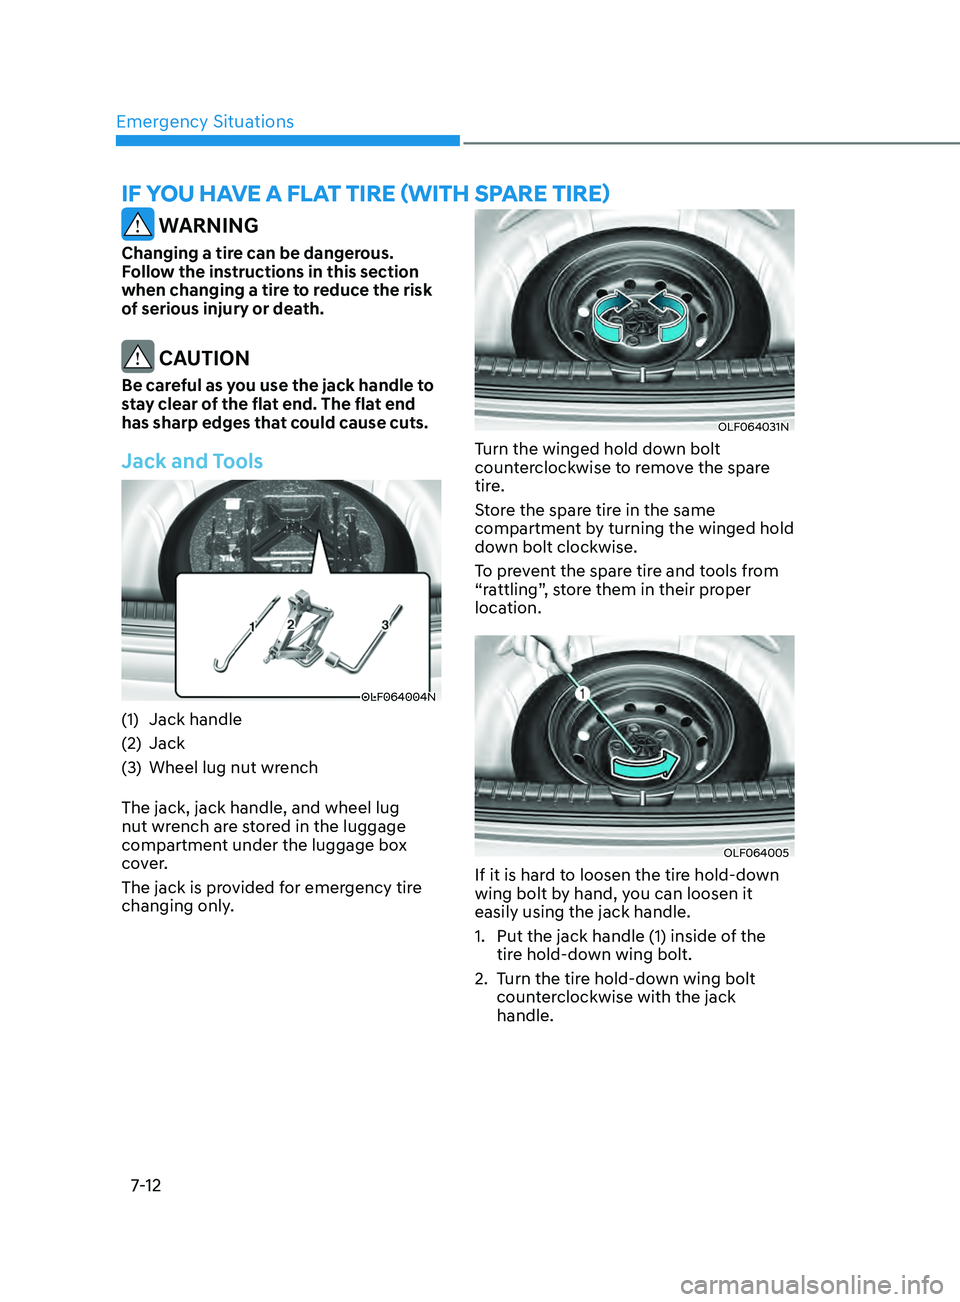 HYUNDAI SONATA 2021  Owners Manual Emergency Situations7-12
if you Have a flaT  Tire (Wi TH  s Pare  T ire)
 WARNING
Changing a tire can be dangerous. 
Follow the instructions in this section 
when changing a tire to reduce the risk 
o